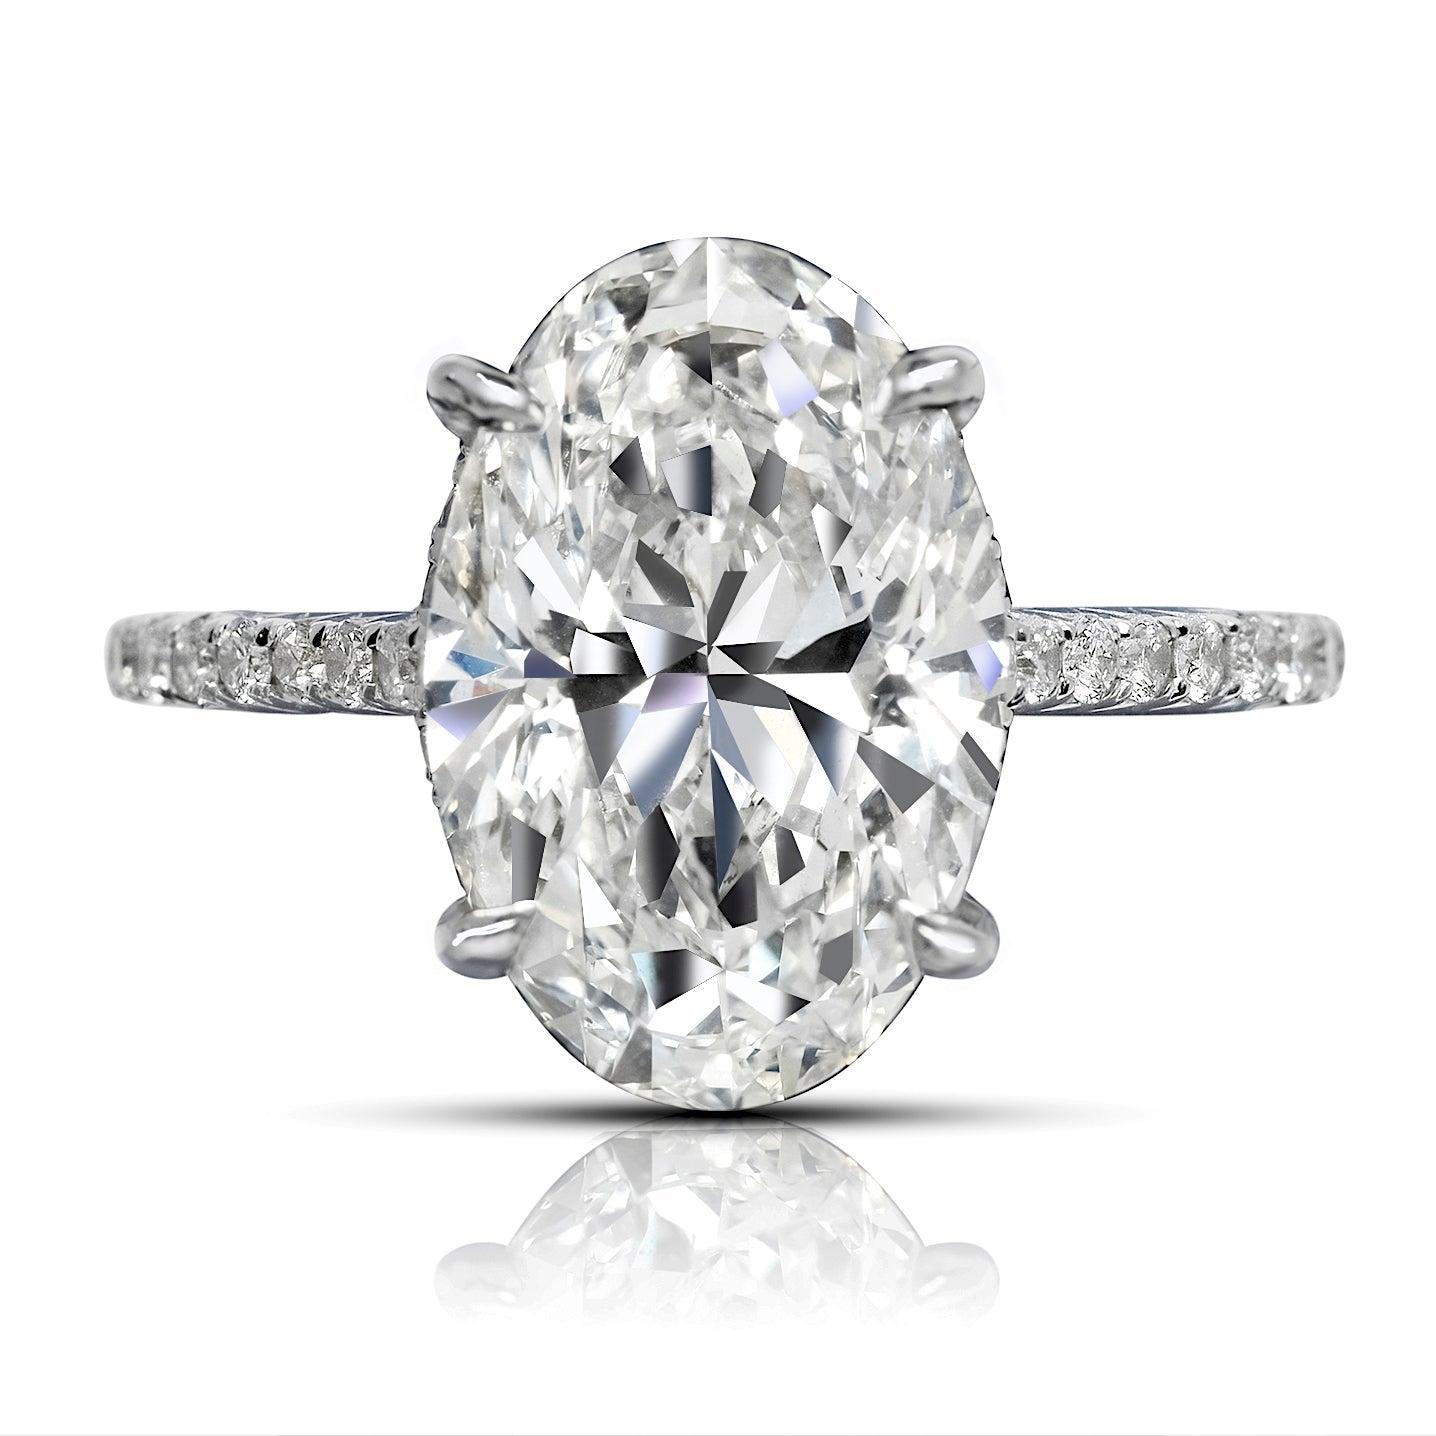 DIANA DIAMOND ENGAGEMENT RING in 18K WHITE GOLD BY MIKE NEKTA
GIA CERTIFIED  

Center Diamond:
Carat Weight: 5 Carats
Color: H
Clarity: VS2
Style:  OVAL BRILLIANT
Approximate Measurements: ﻿ 13.7 x 9.1 x 5.8 mm

Ring:
Metal: 18K WHITE GOLD
Style: 4